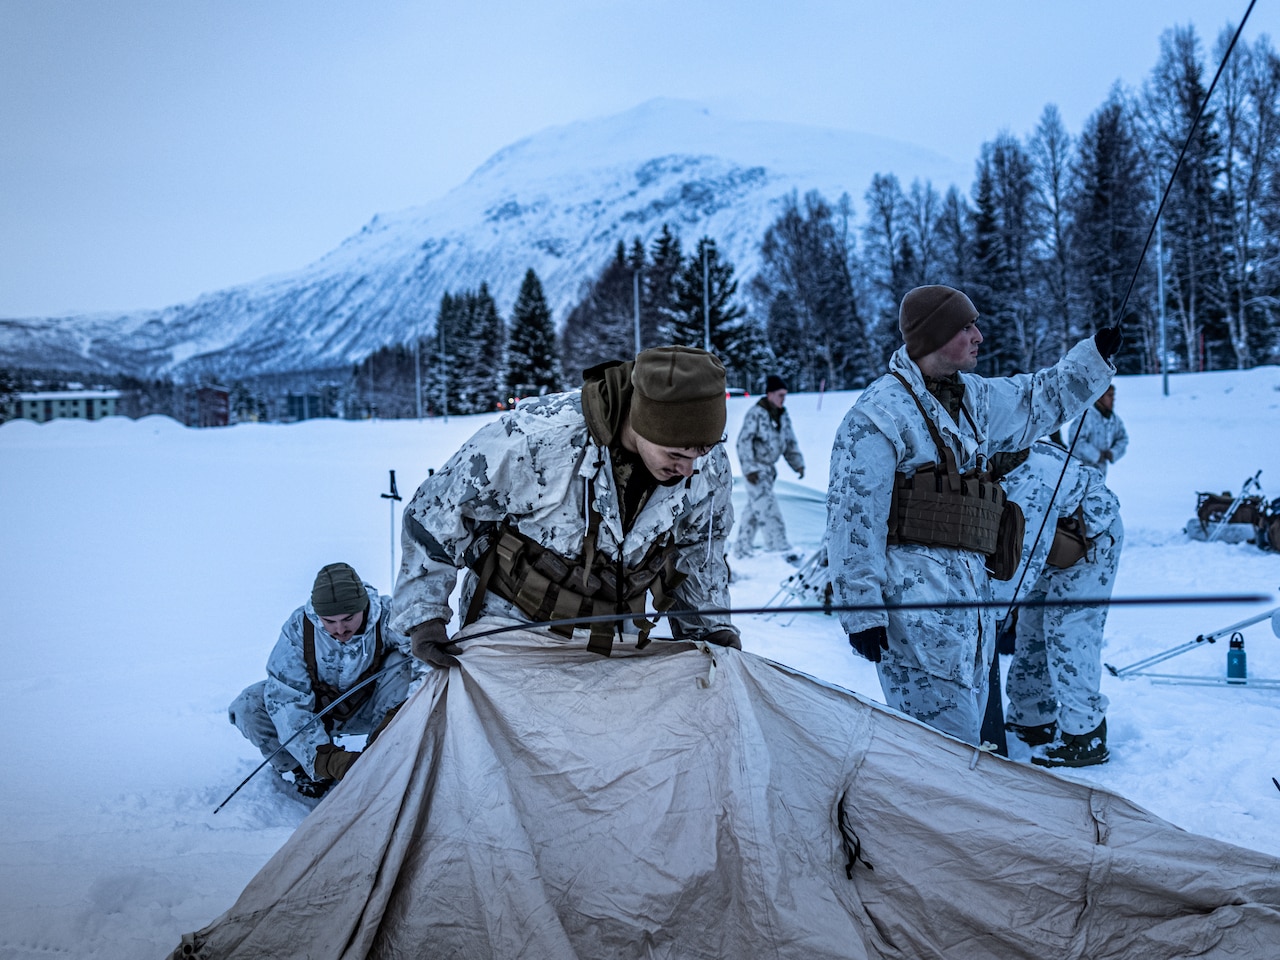 A Marine sets up a tent in the snow as fellow service members work in the background.